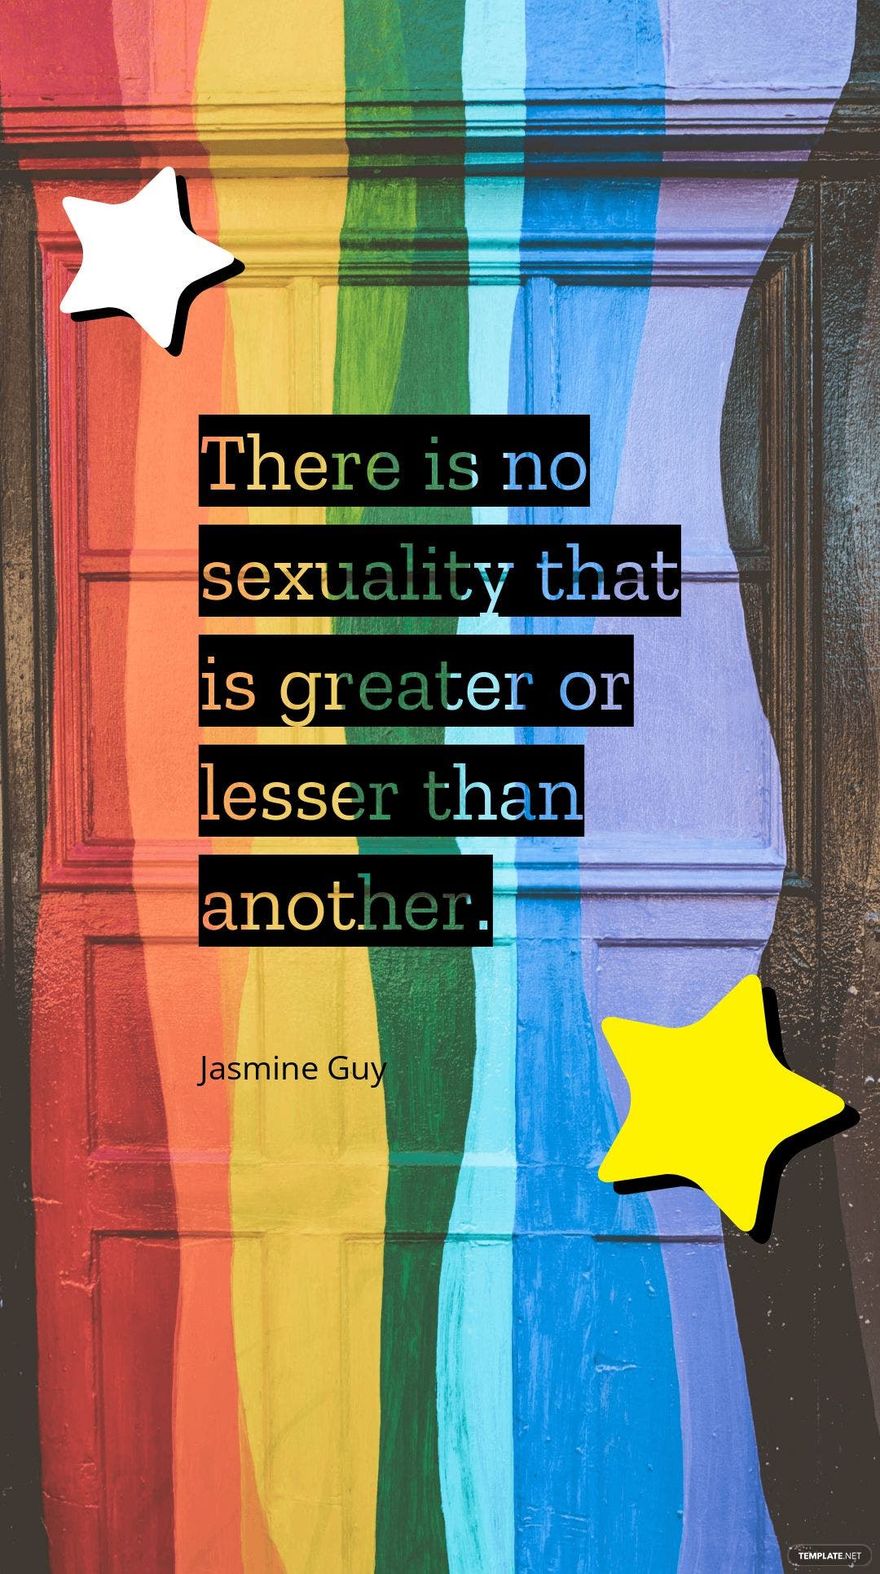 Jasmine Guy - There is no sexuality that is greater or lesser than another. in JPG